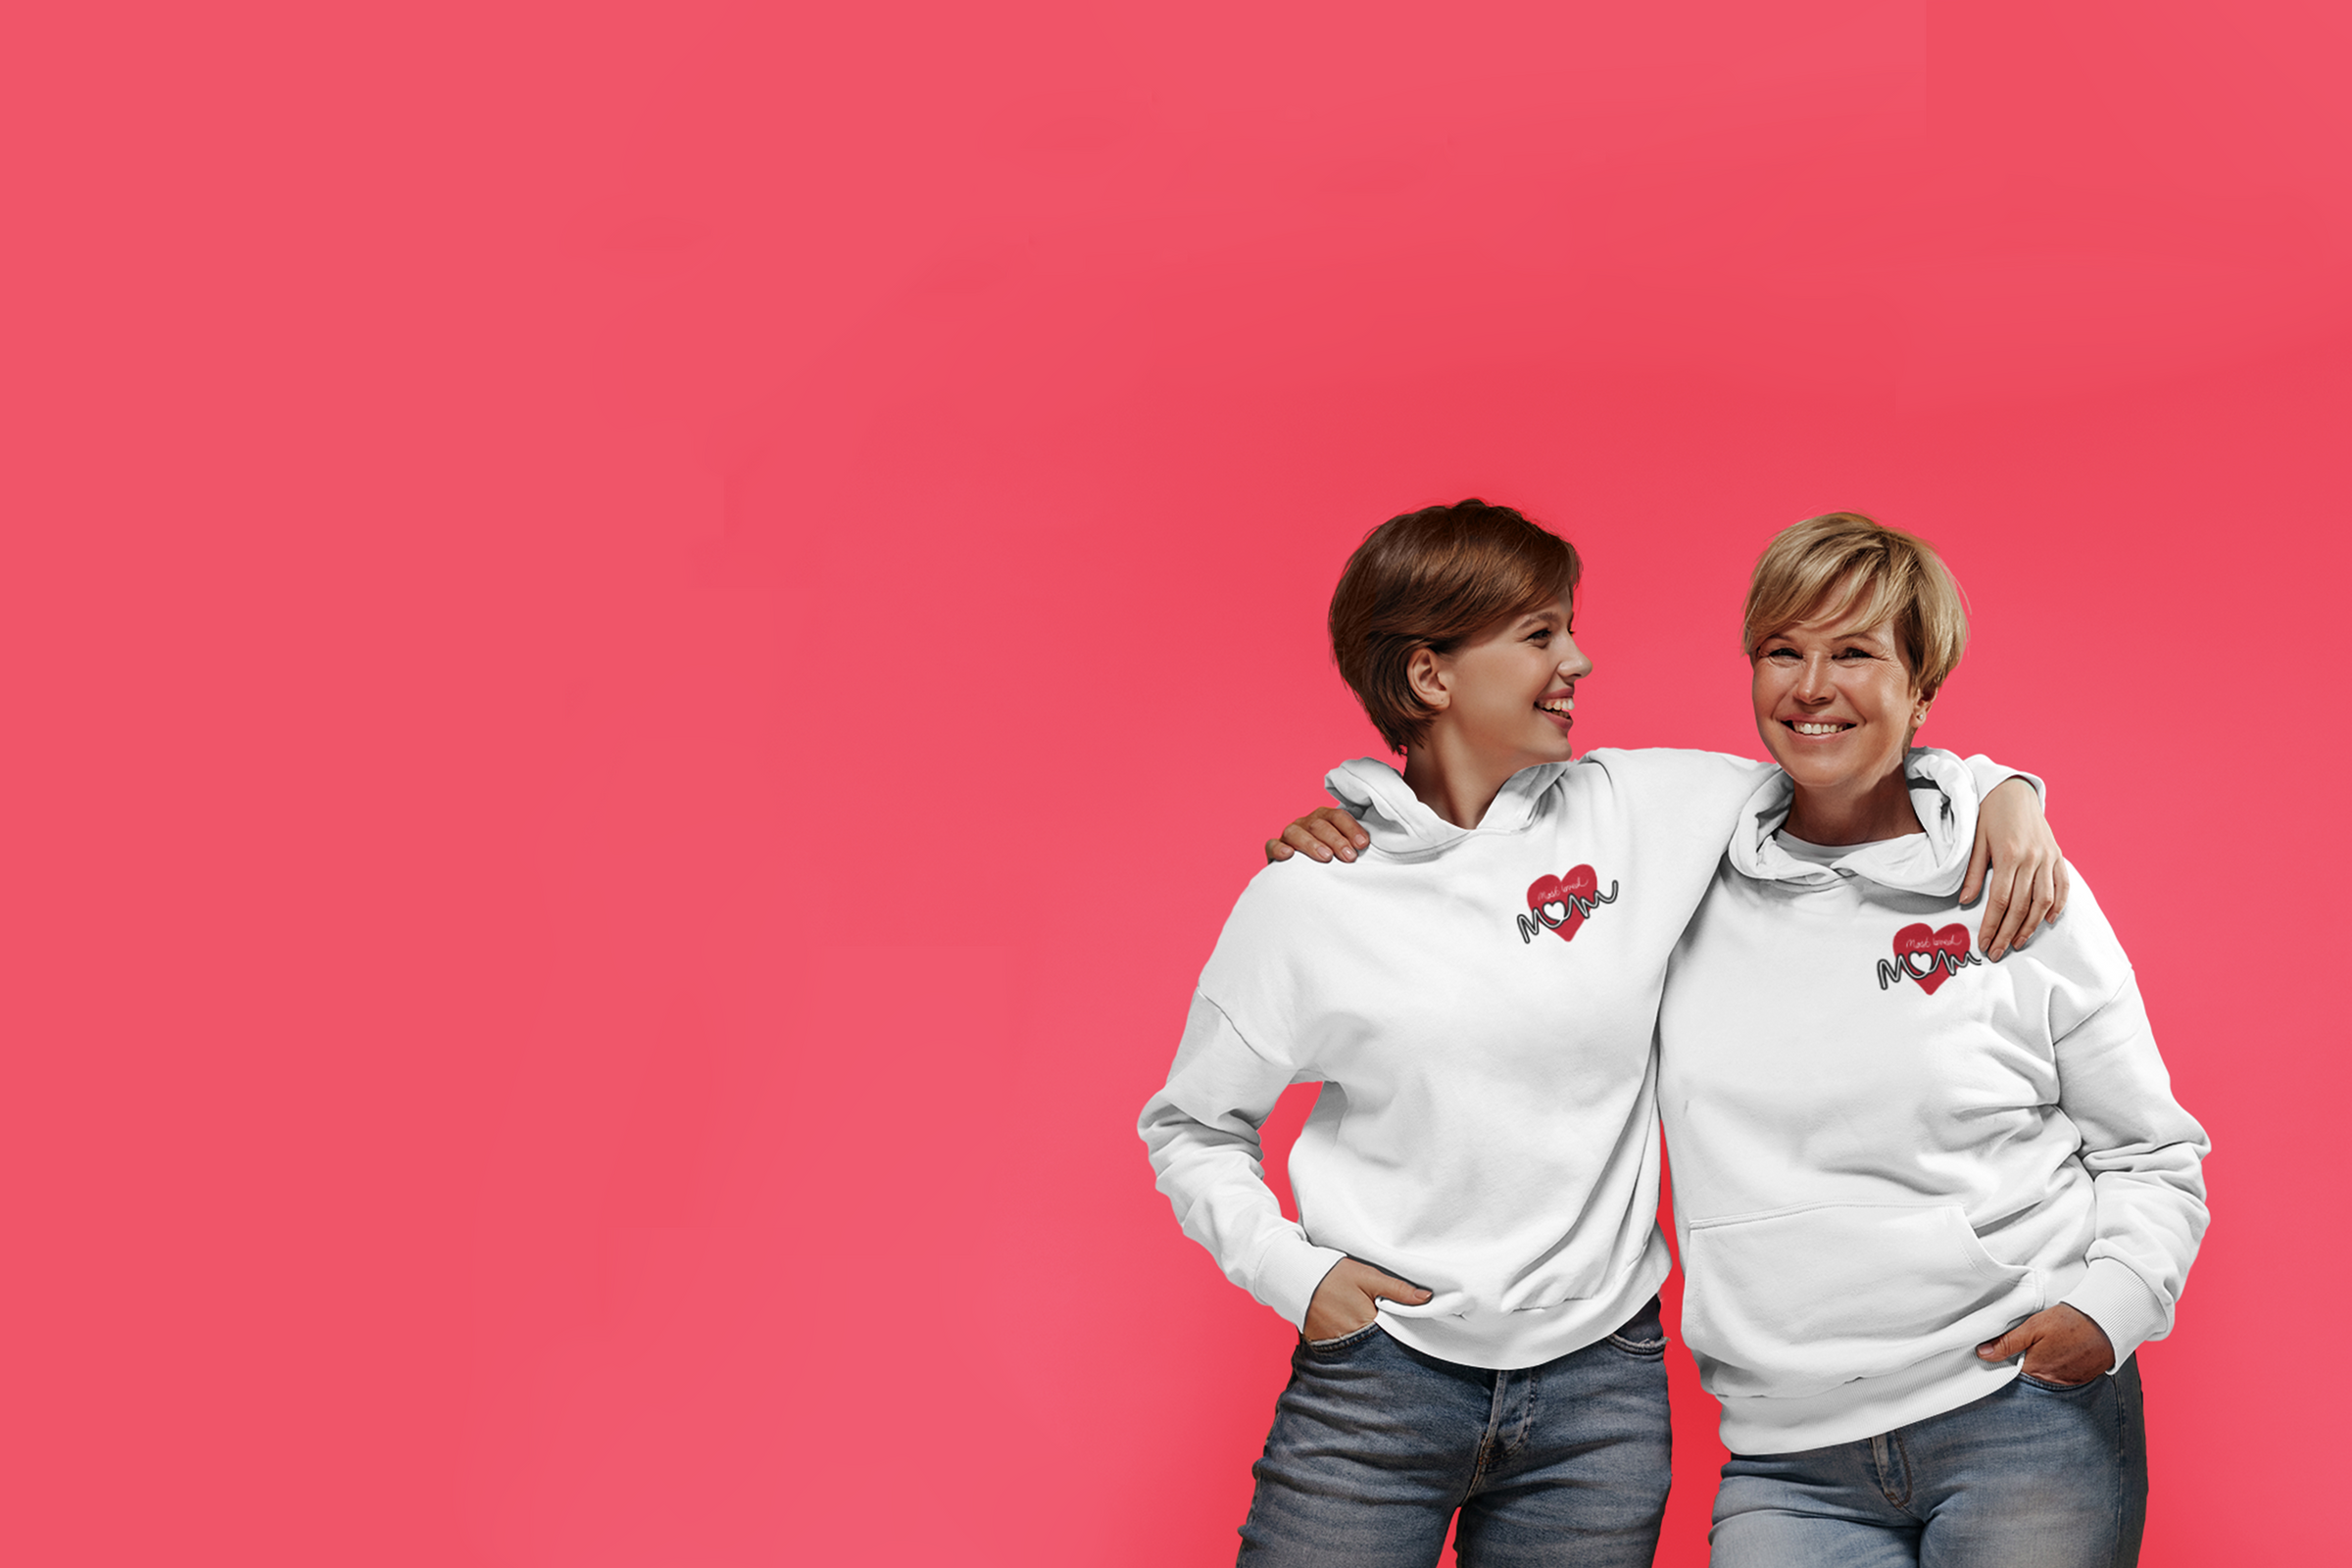 image of mom and daughter wearing matching white hoodies that say "Most Loved Mom" on a red heart on the chest.